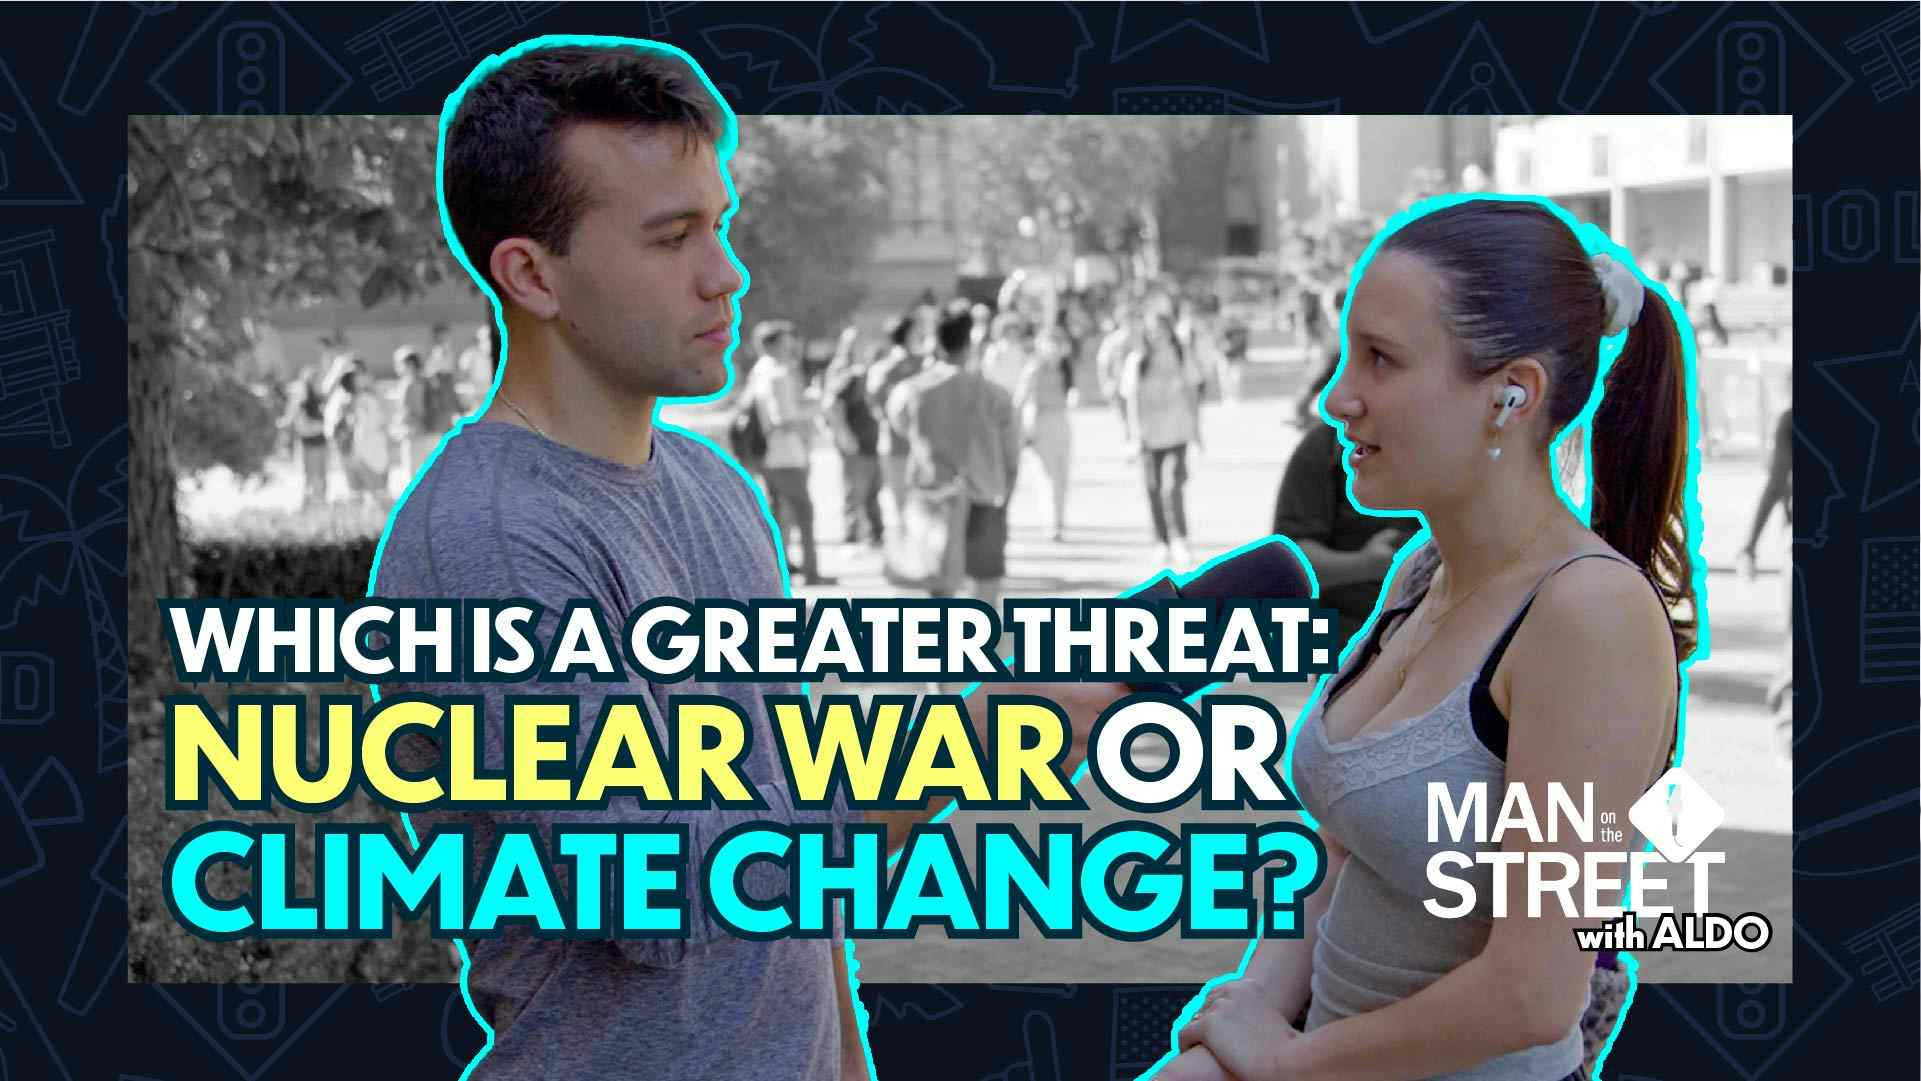 Which Is a Greater Threat: Nuclear War or Climate Change?